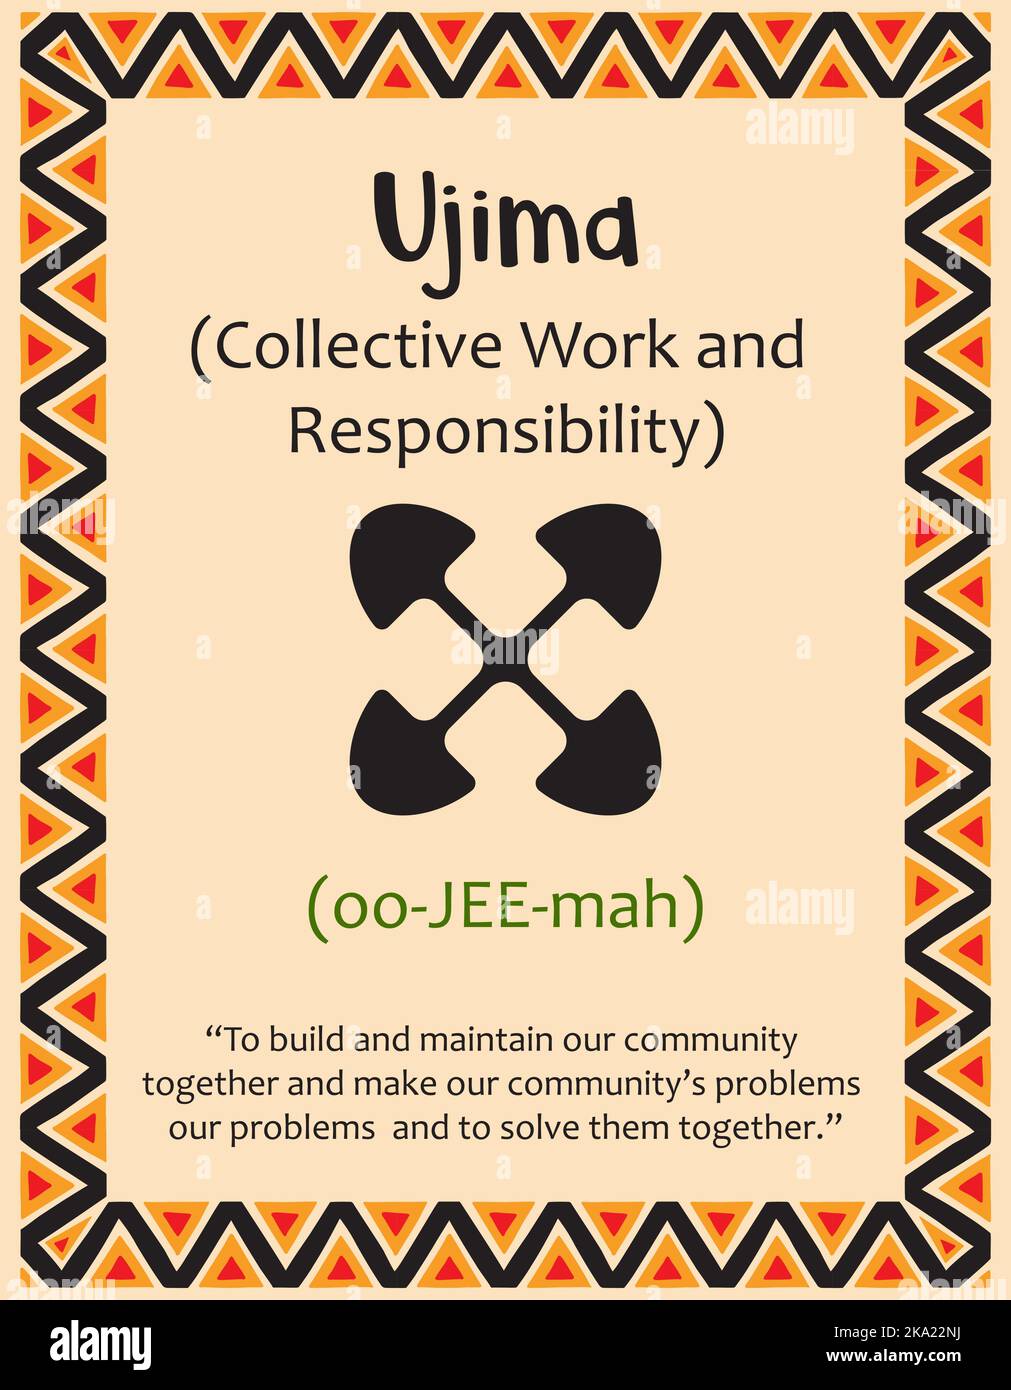 A card with one of the Kwanzaa principles. Symbol Ujiima means Collective work and responsibility in Swahili. Poster with sign and description. Ethnic Stock Vector